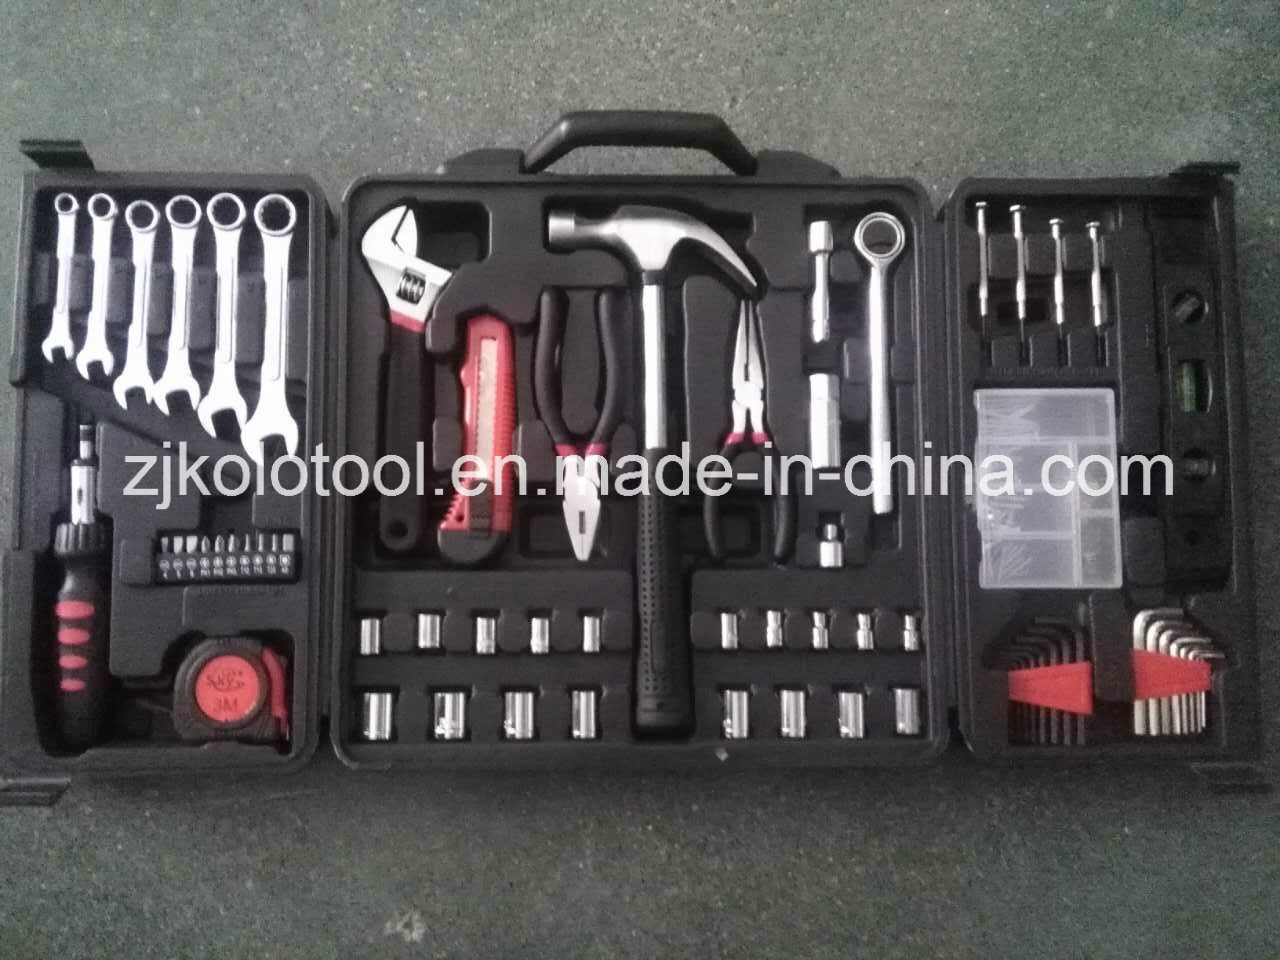 Professional Hand Tool Set with BMC Packing